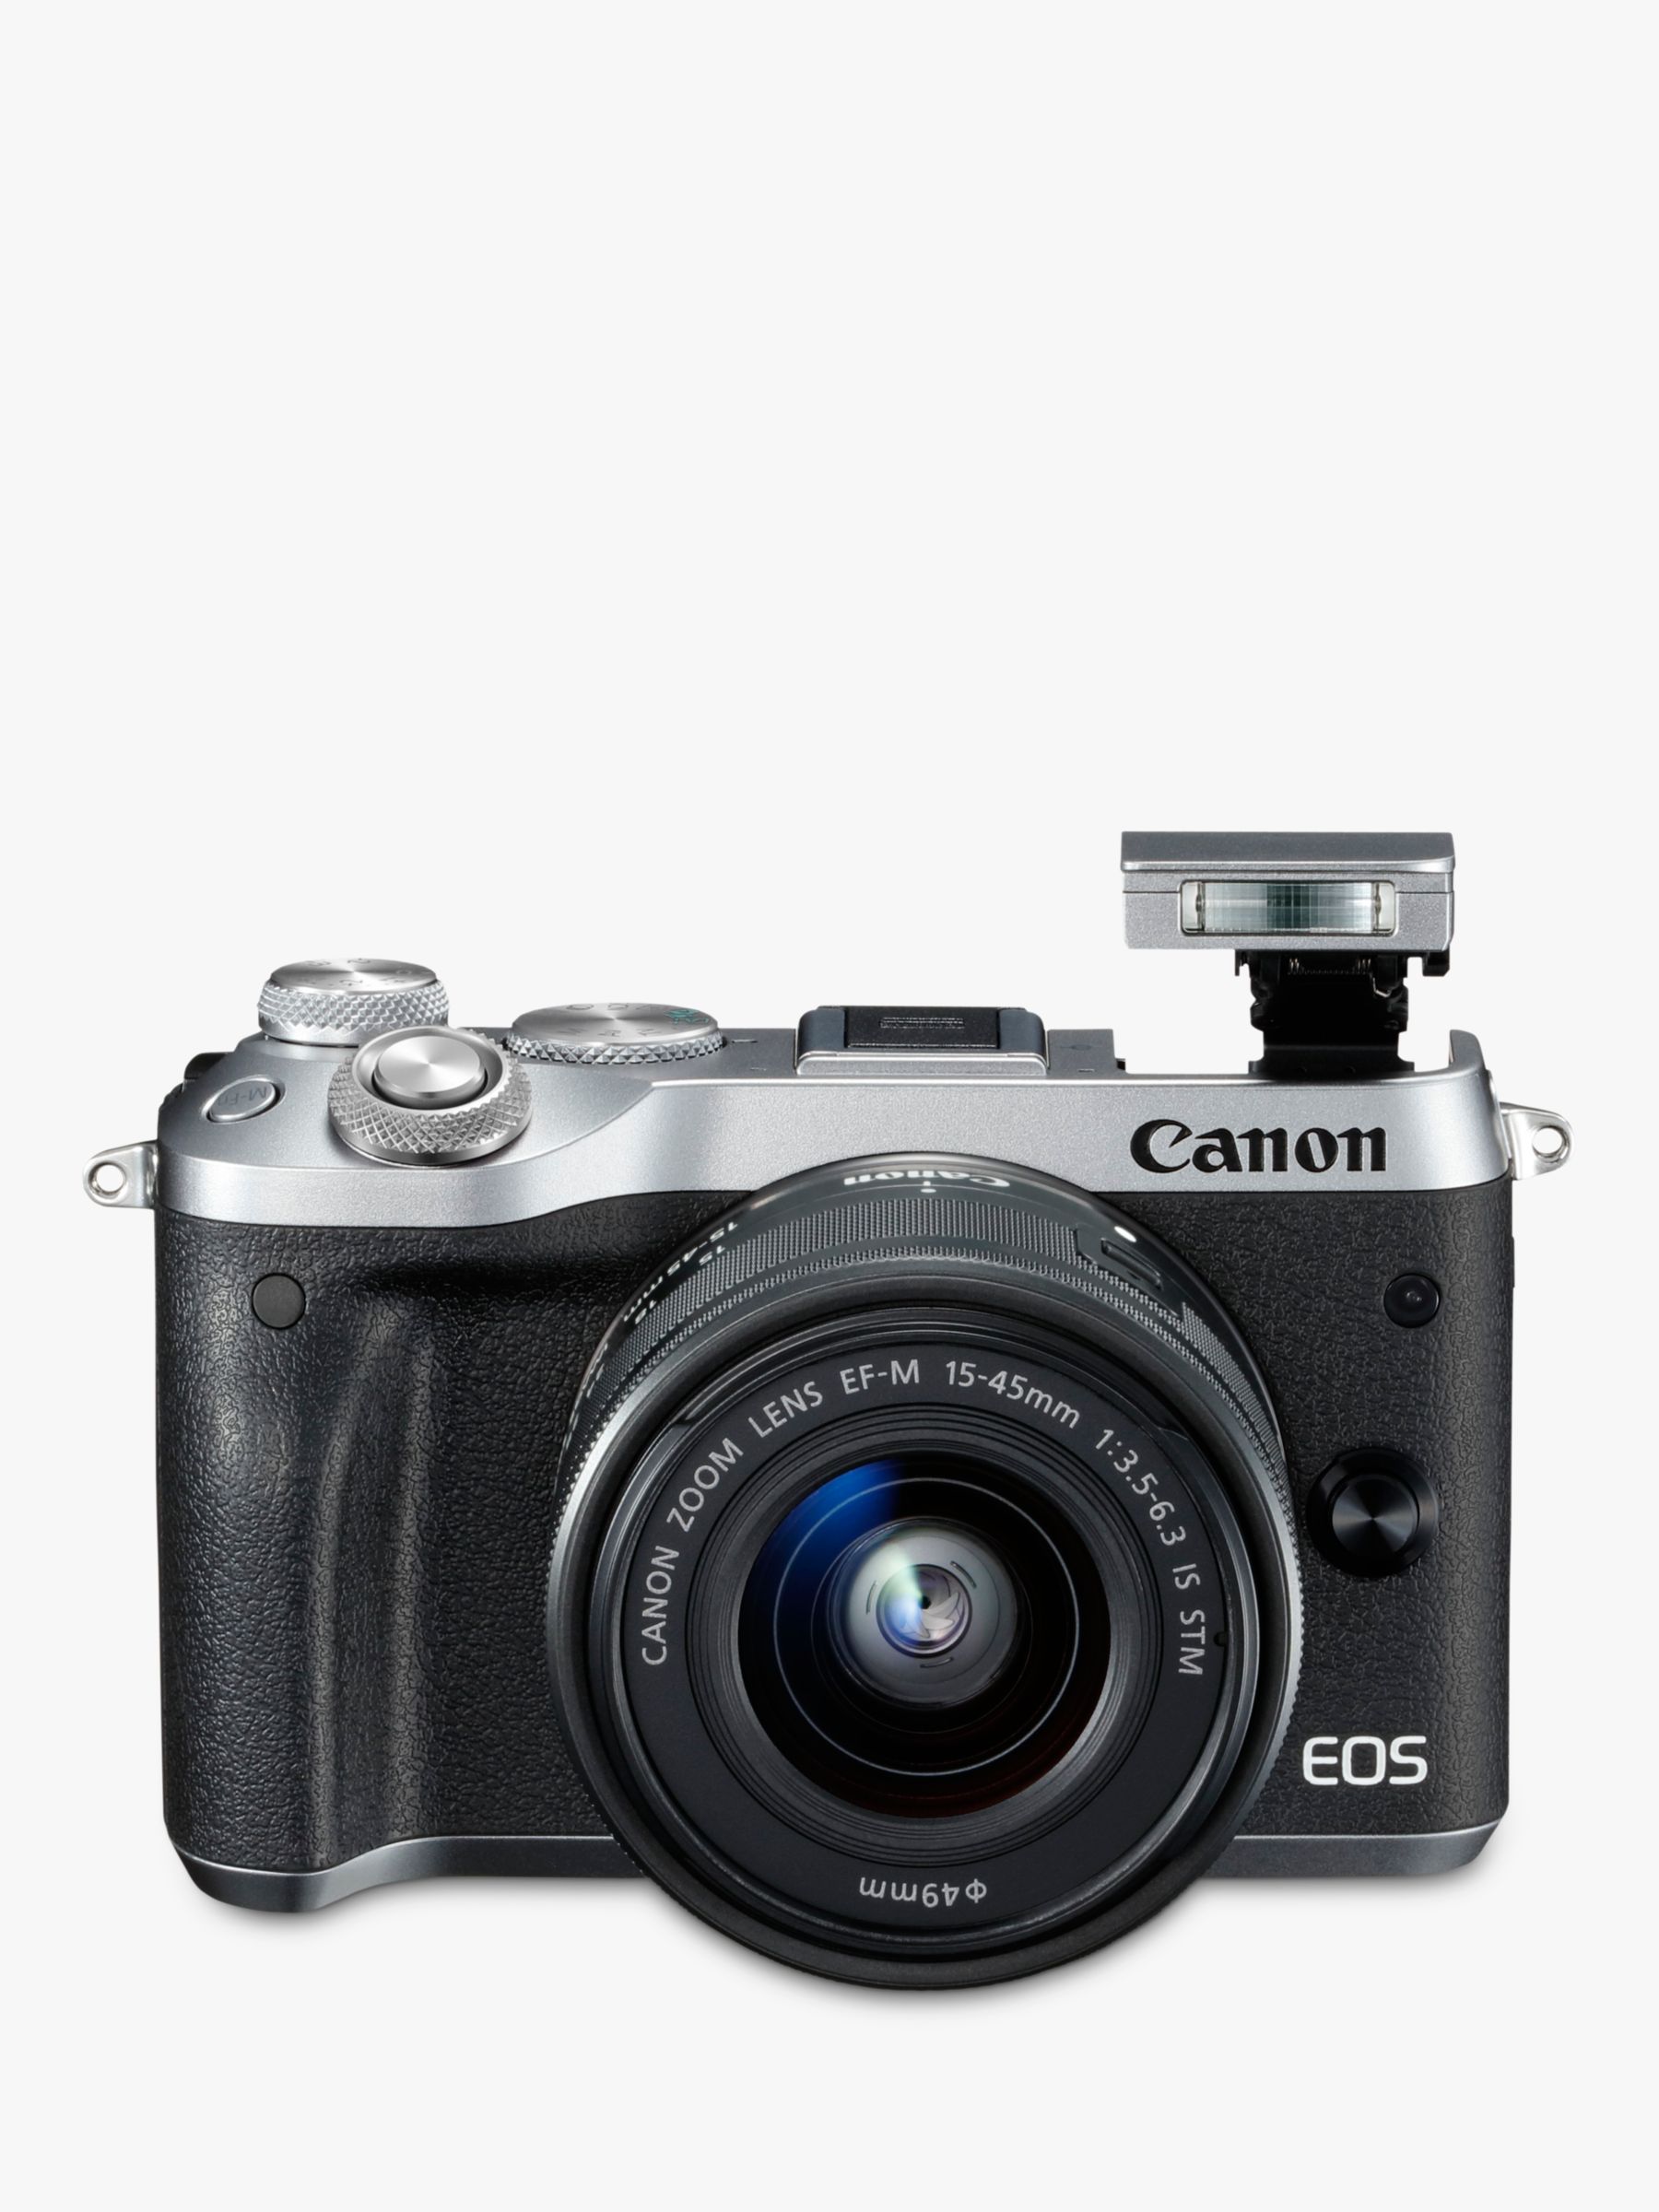 Canon EOS M6 Compact System Camera with EF-M 15-45mm IS STM Lens, HD 1080p, 24.2MP, Wi-Fi, Bluetooth, NFC, 3.0" LCD Tiltable Touch Screen, Silver